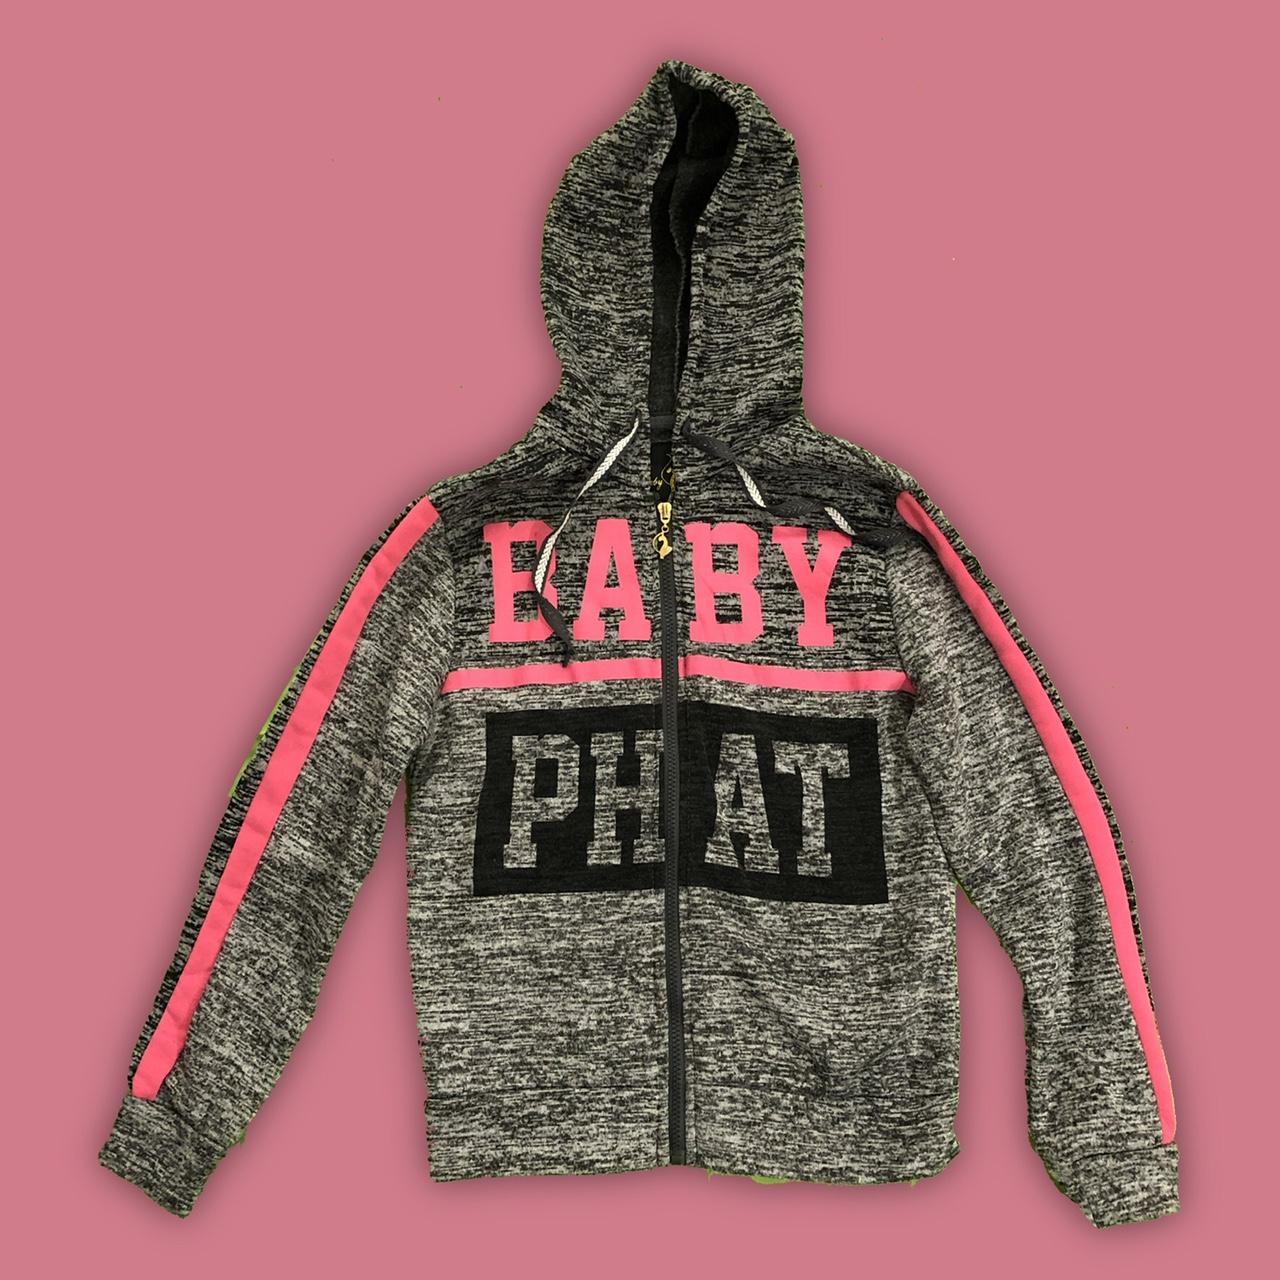 Product Image 1 - Baby Phat hoodie by Queen